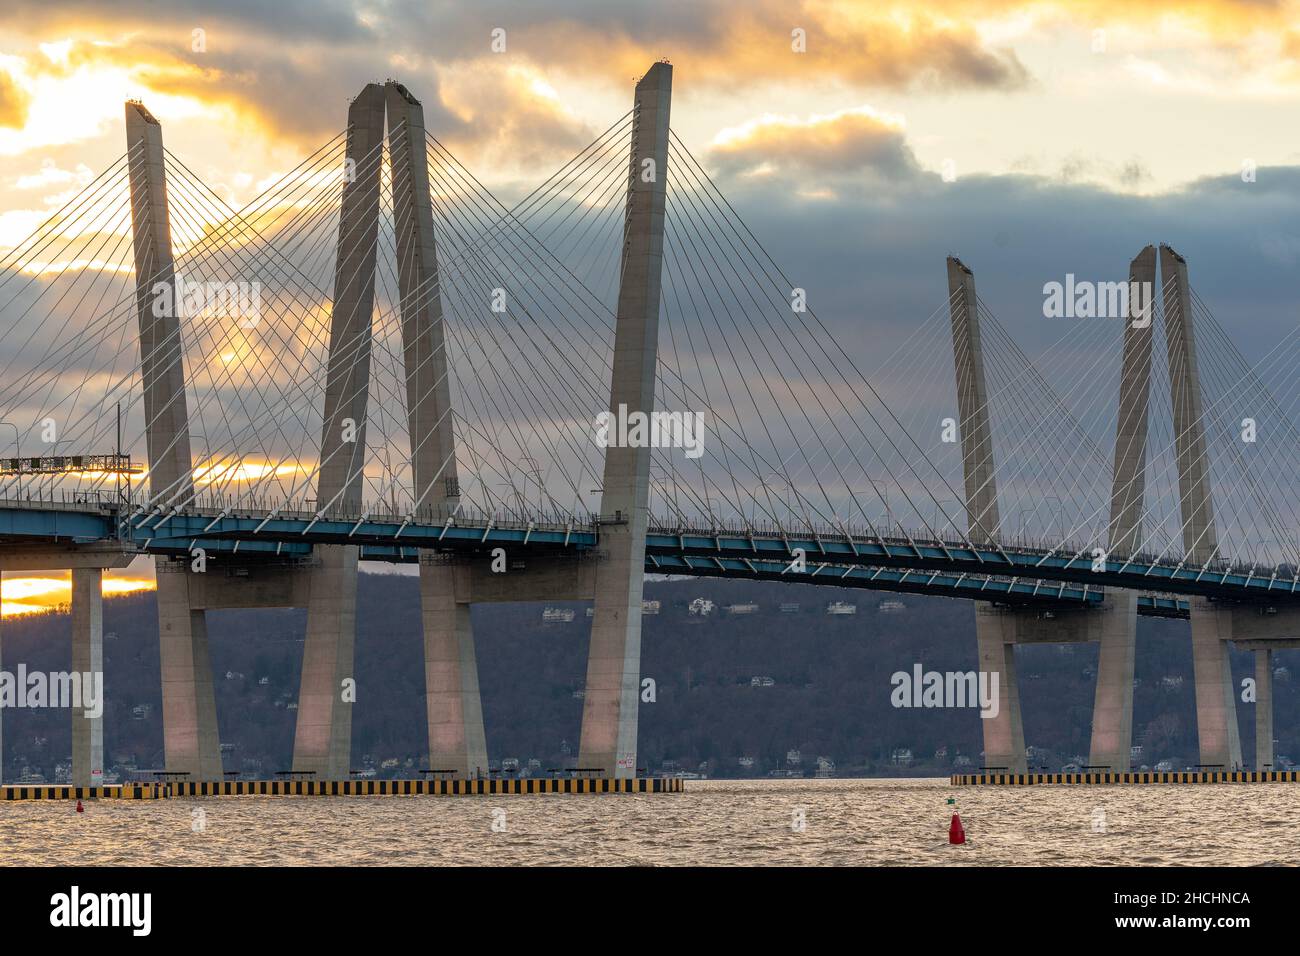 Tarrytown, NY - USA - Dec. 26, 2021: Closeup sunset view of the Governor Mario M. Cuomo Bridge, a twin cable-stayed bridge spanning the Hudson River b Stock Photo